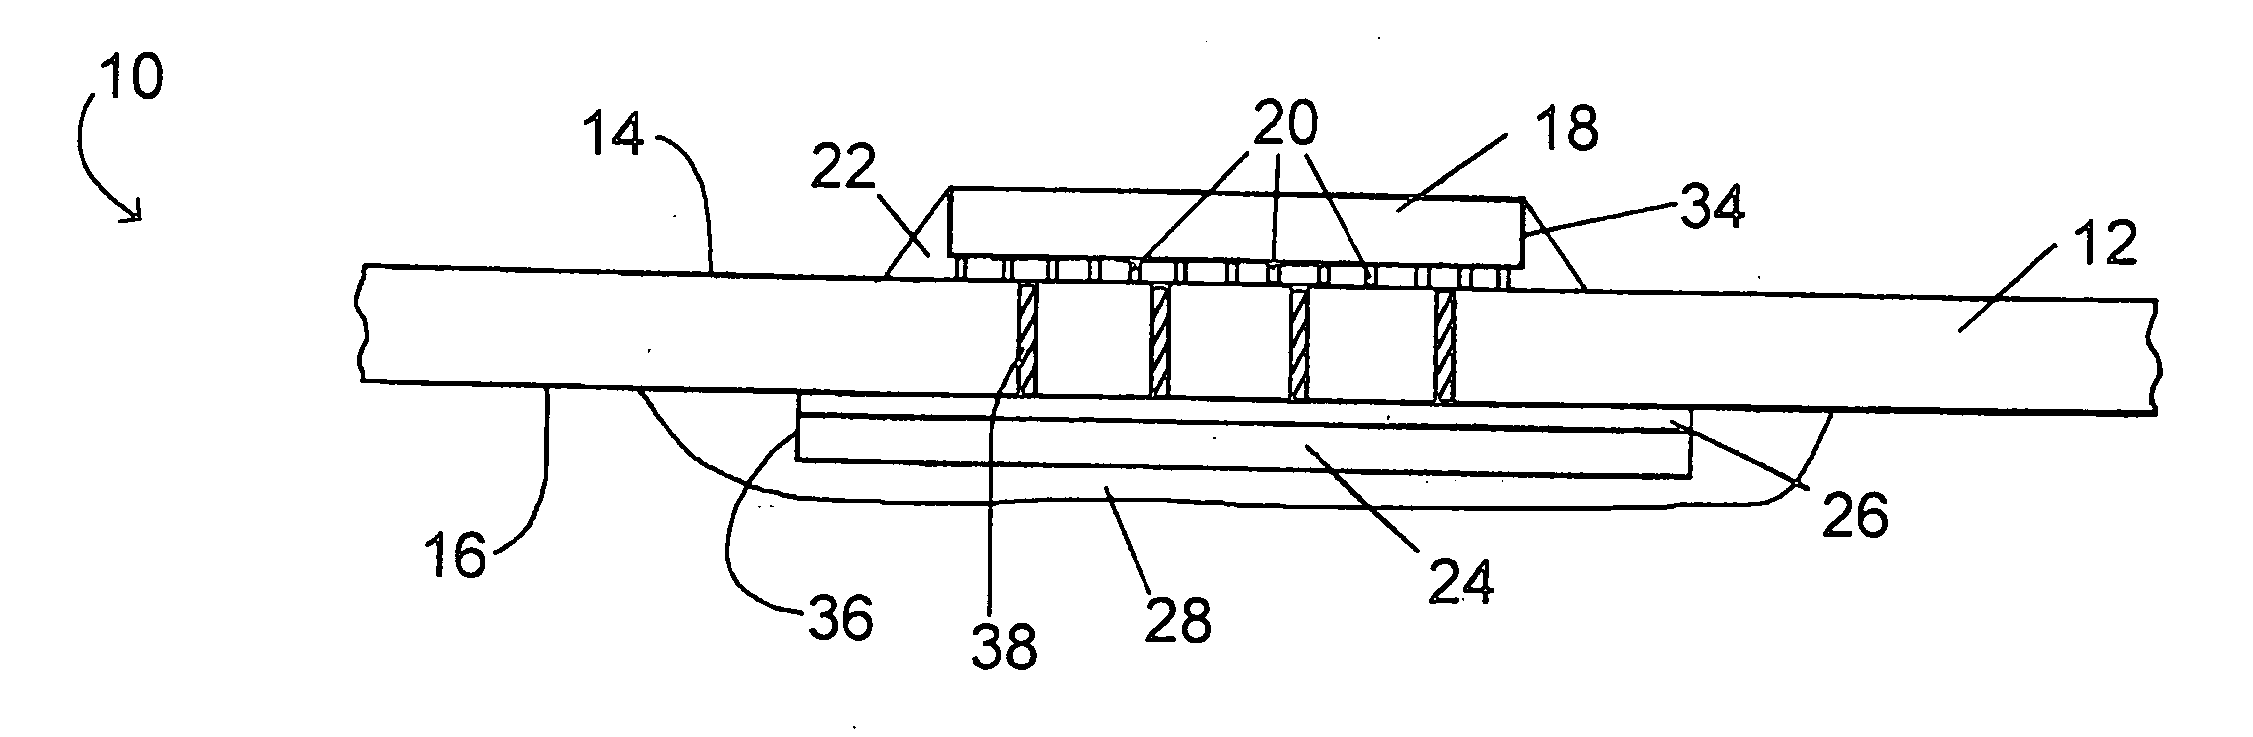 Circuit board with localized stiffener for enhanced circuit component reliability